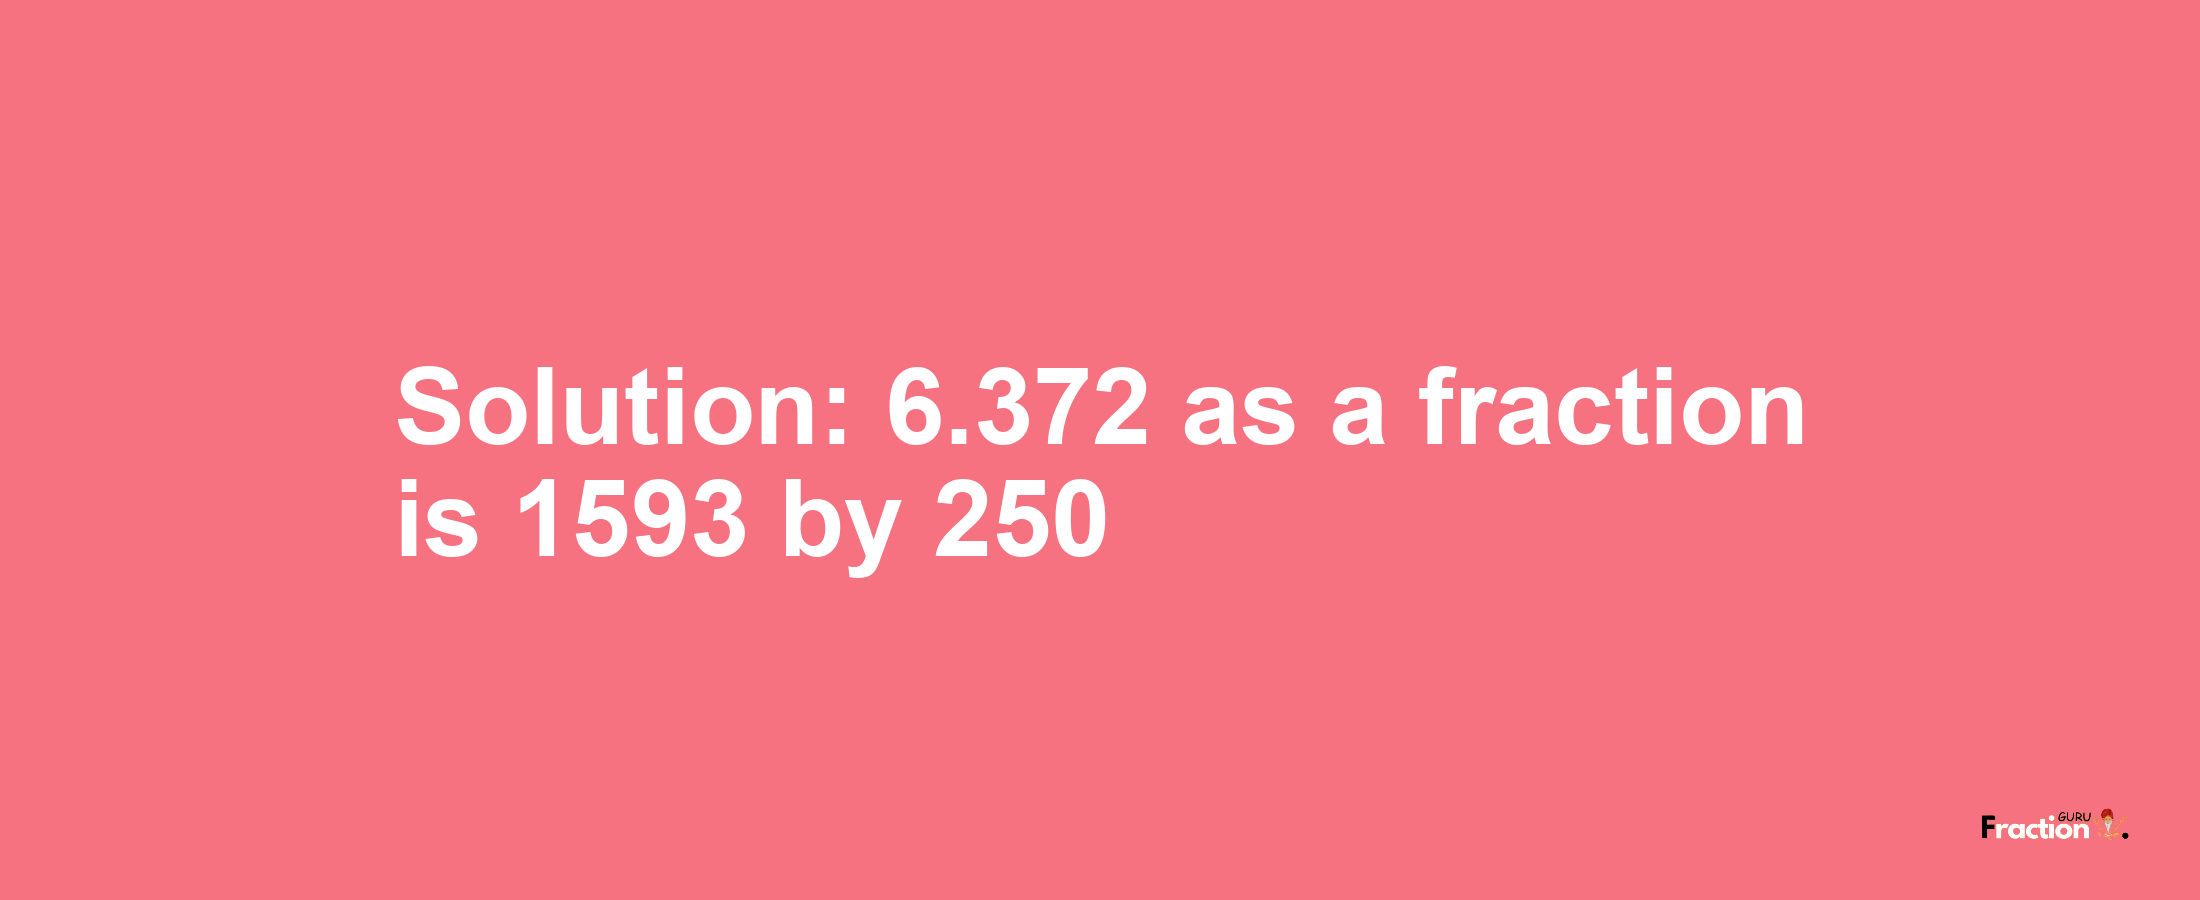 Solution:6.372 as a fraction is 1593/250